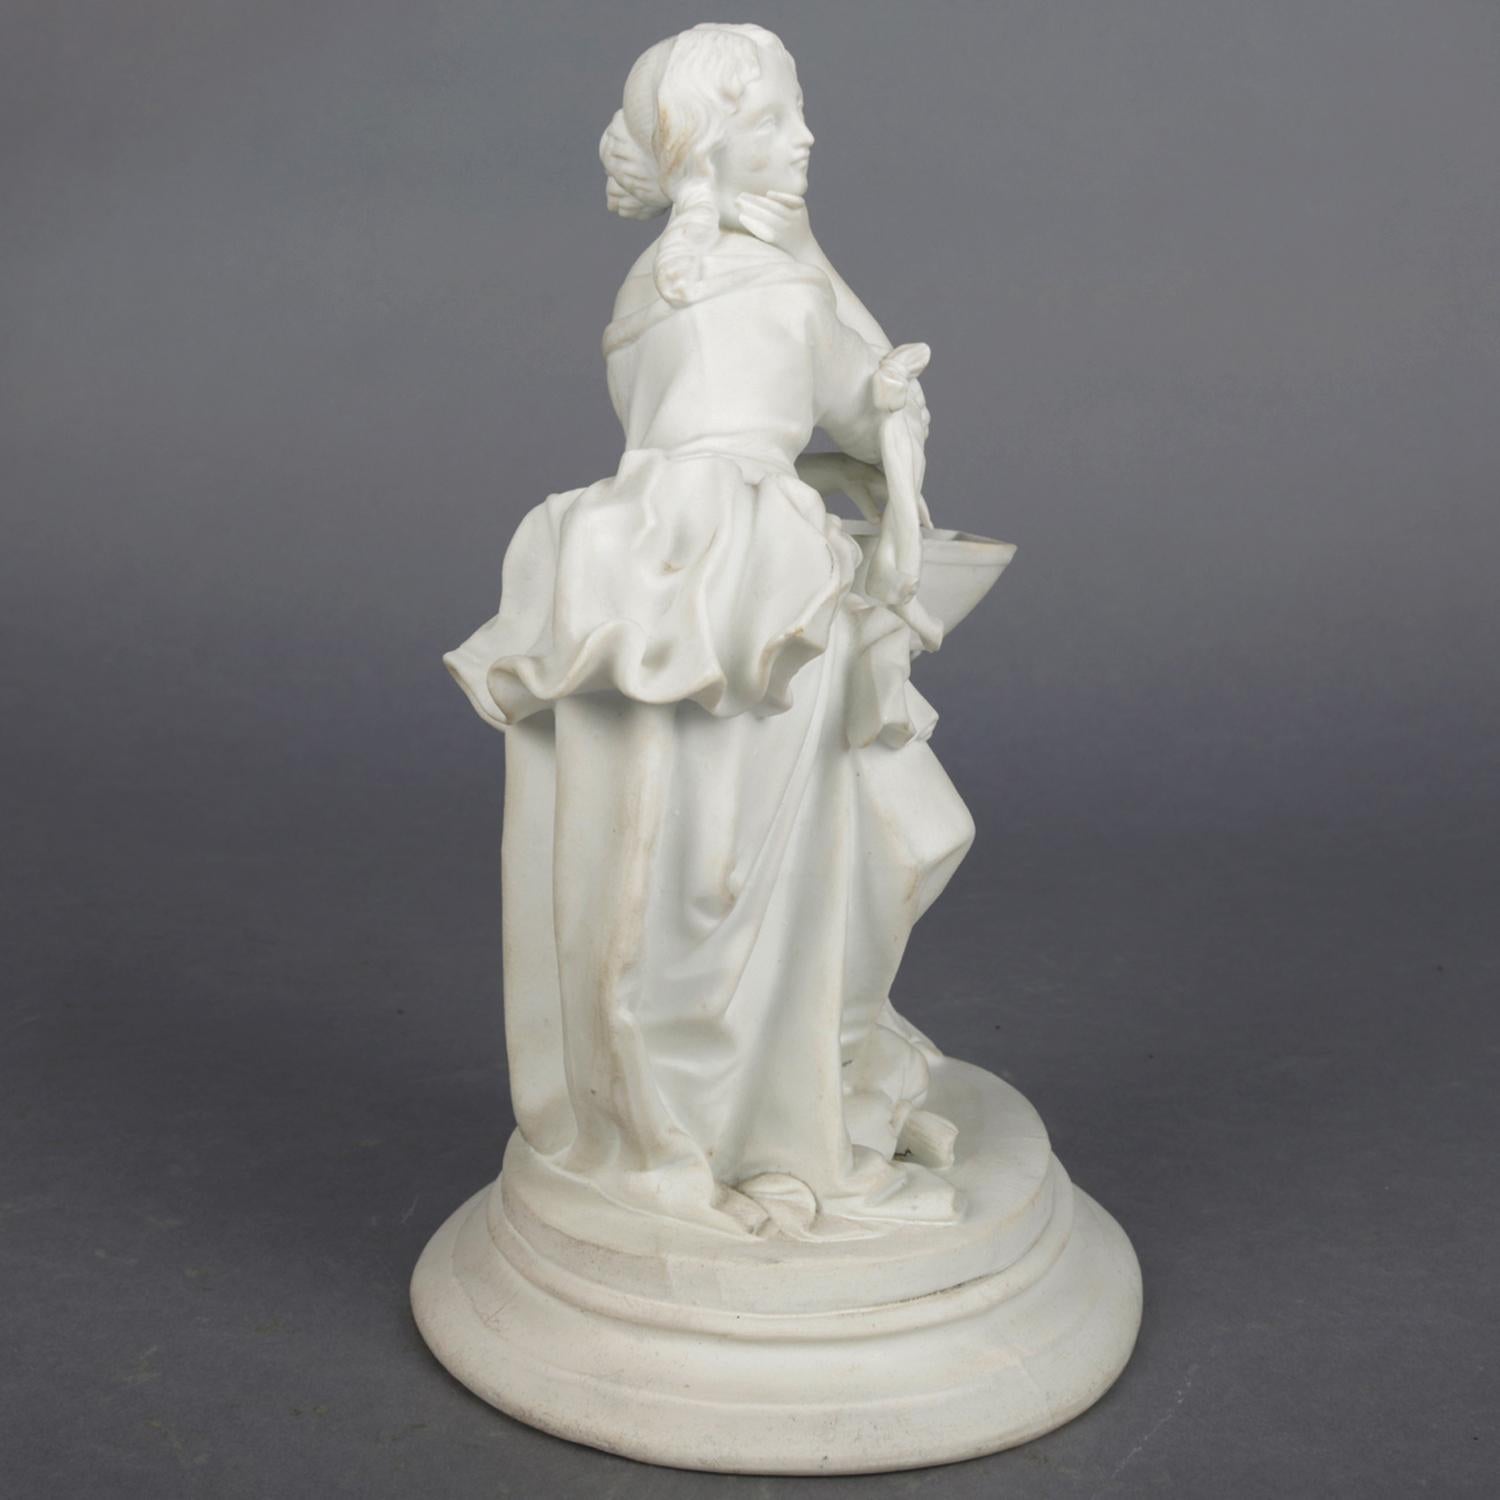 Porcelain Antique English Parian Figural Genre Grouping of Woman & Washstand, 19th Century